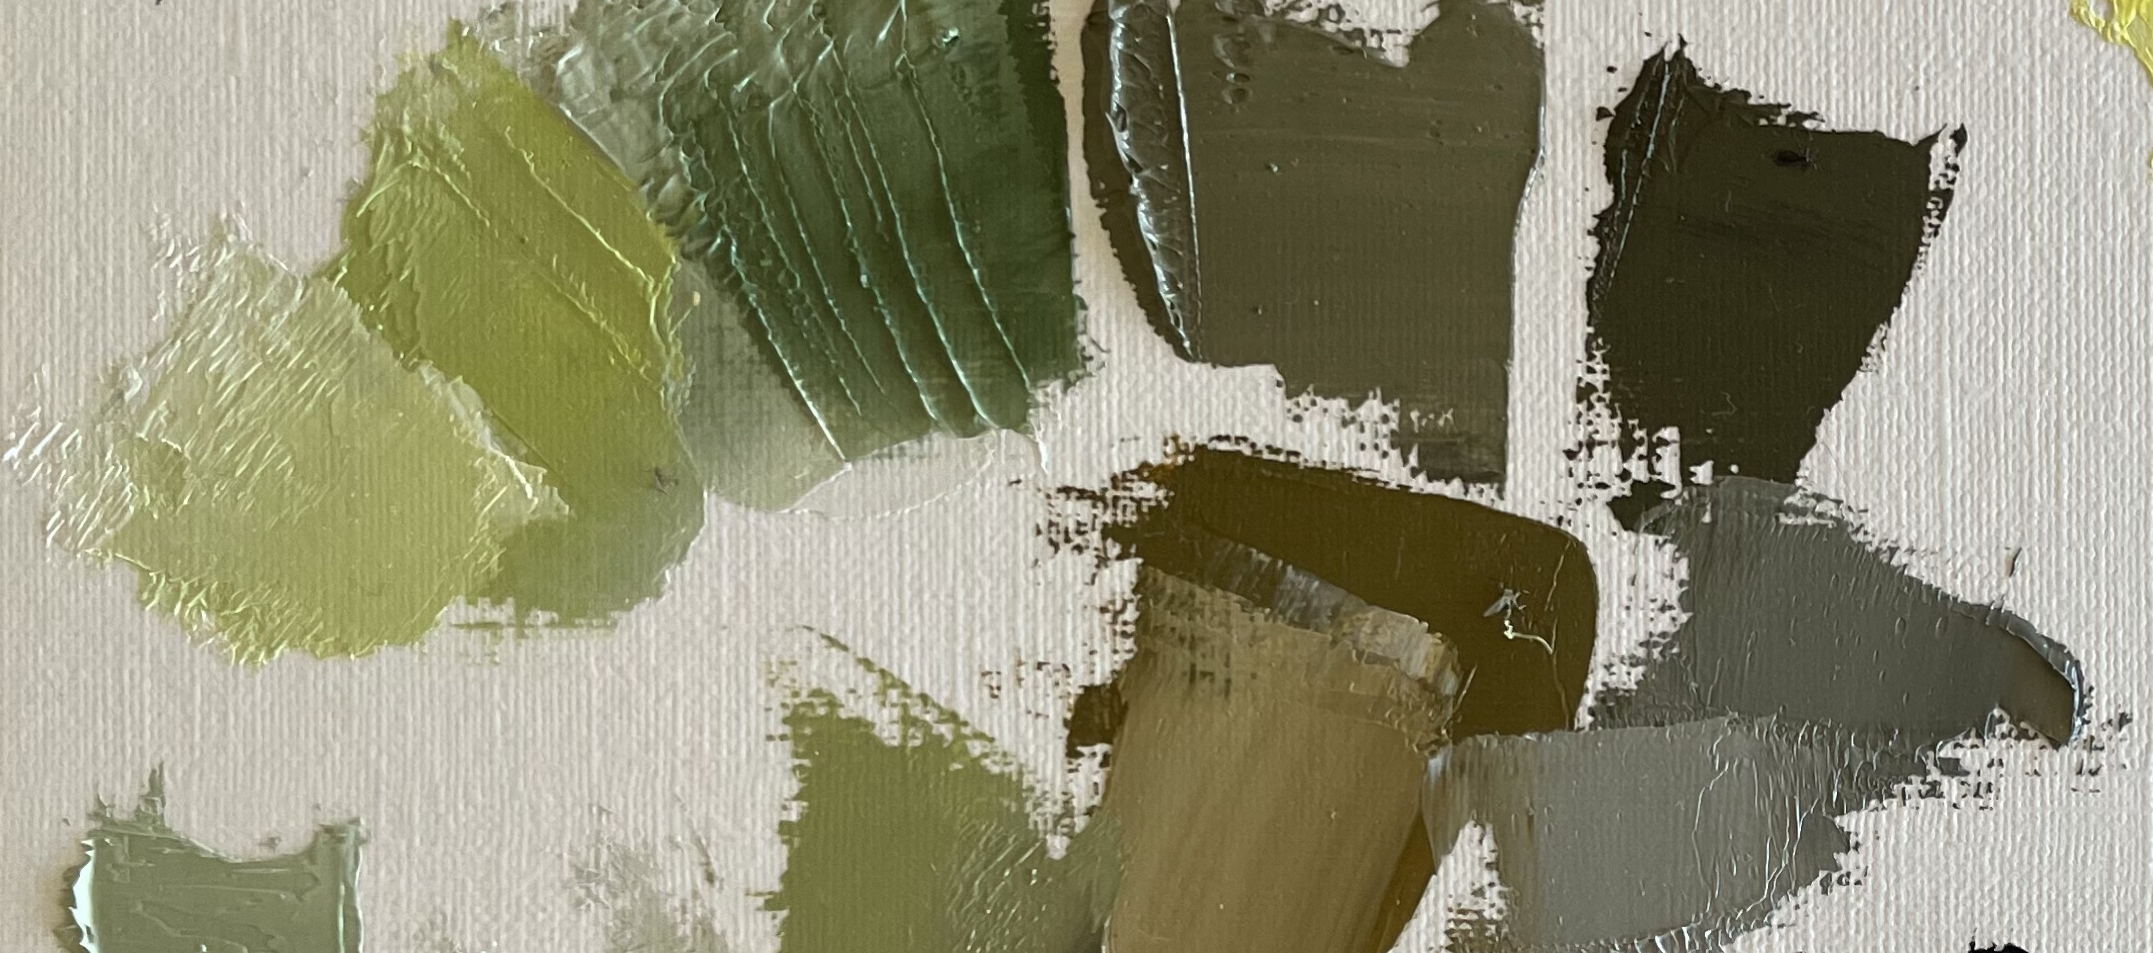 Create Your Own Sage Green Acrylic Paint